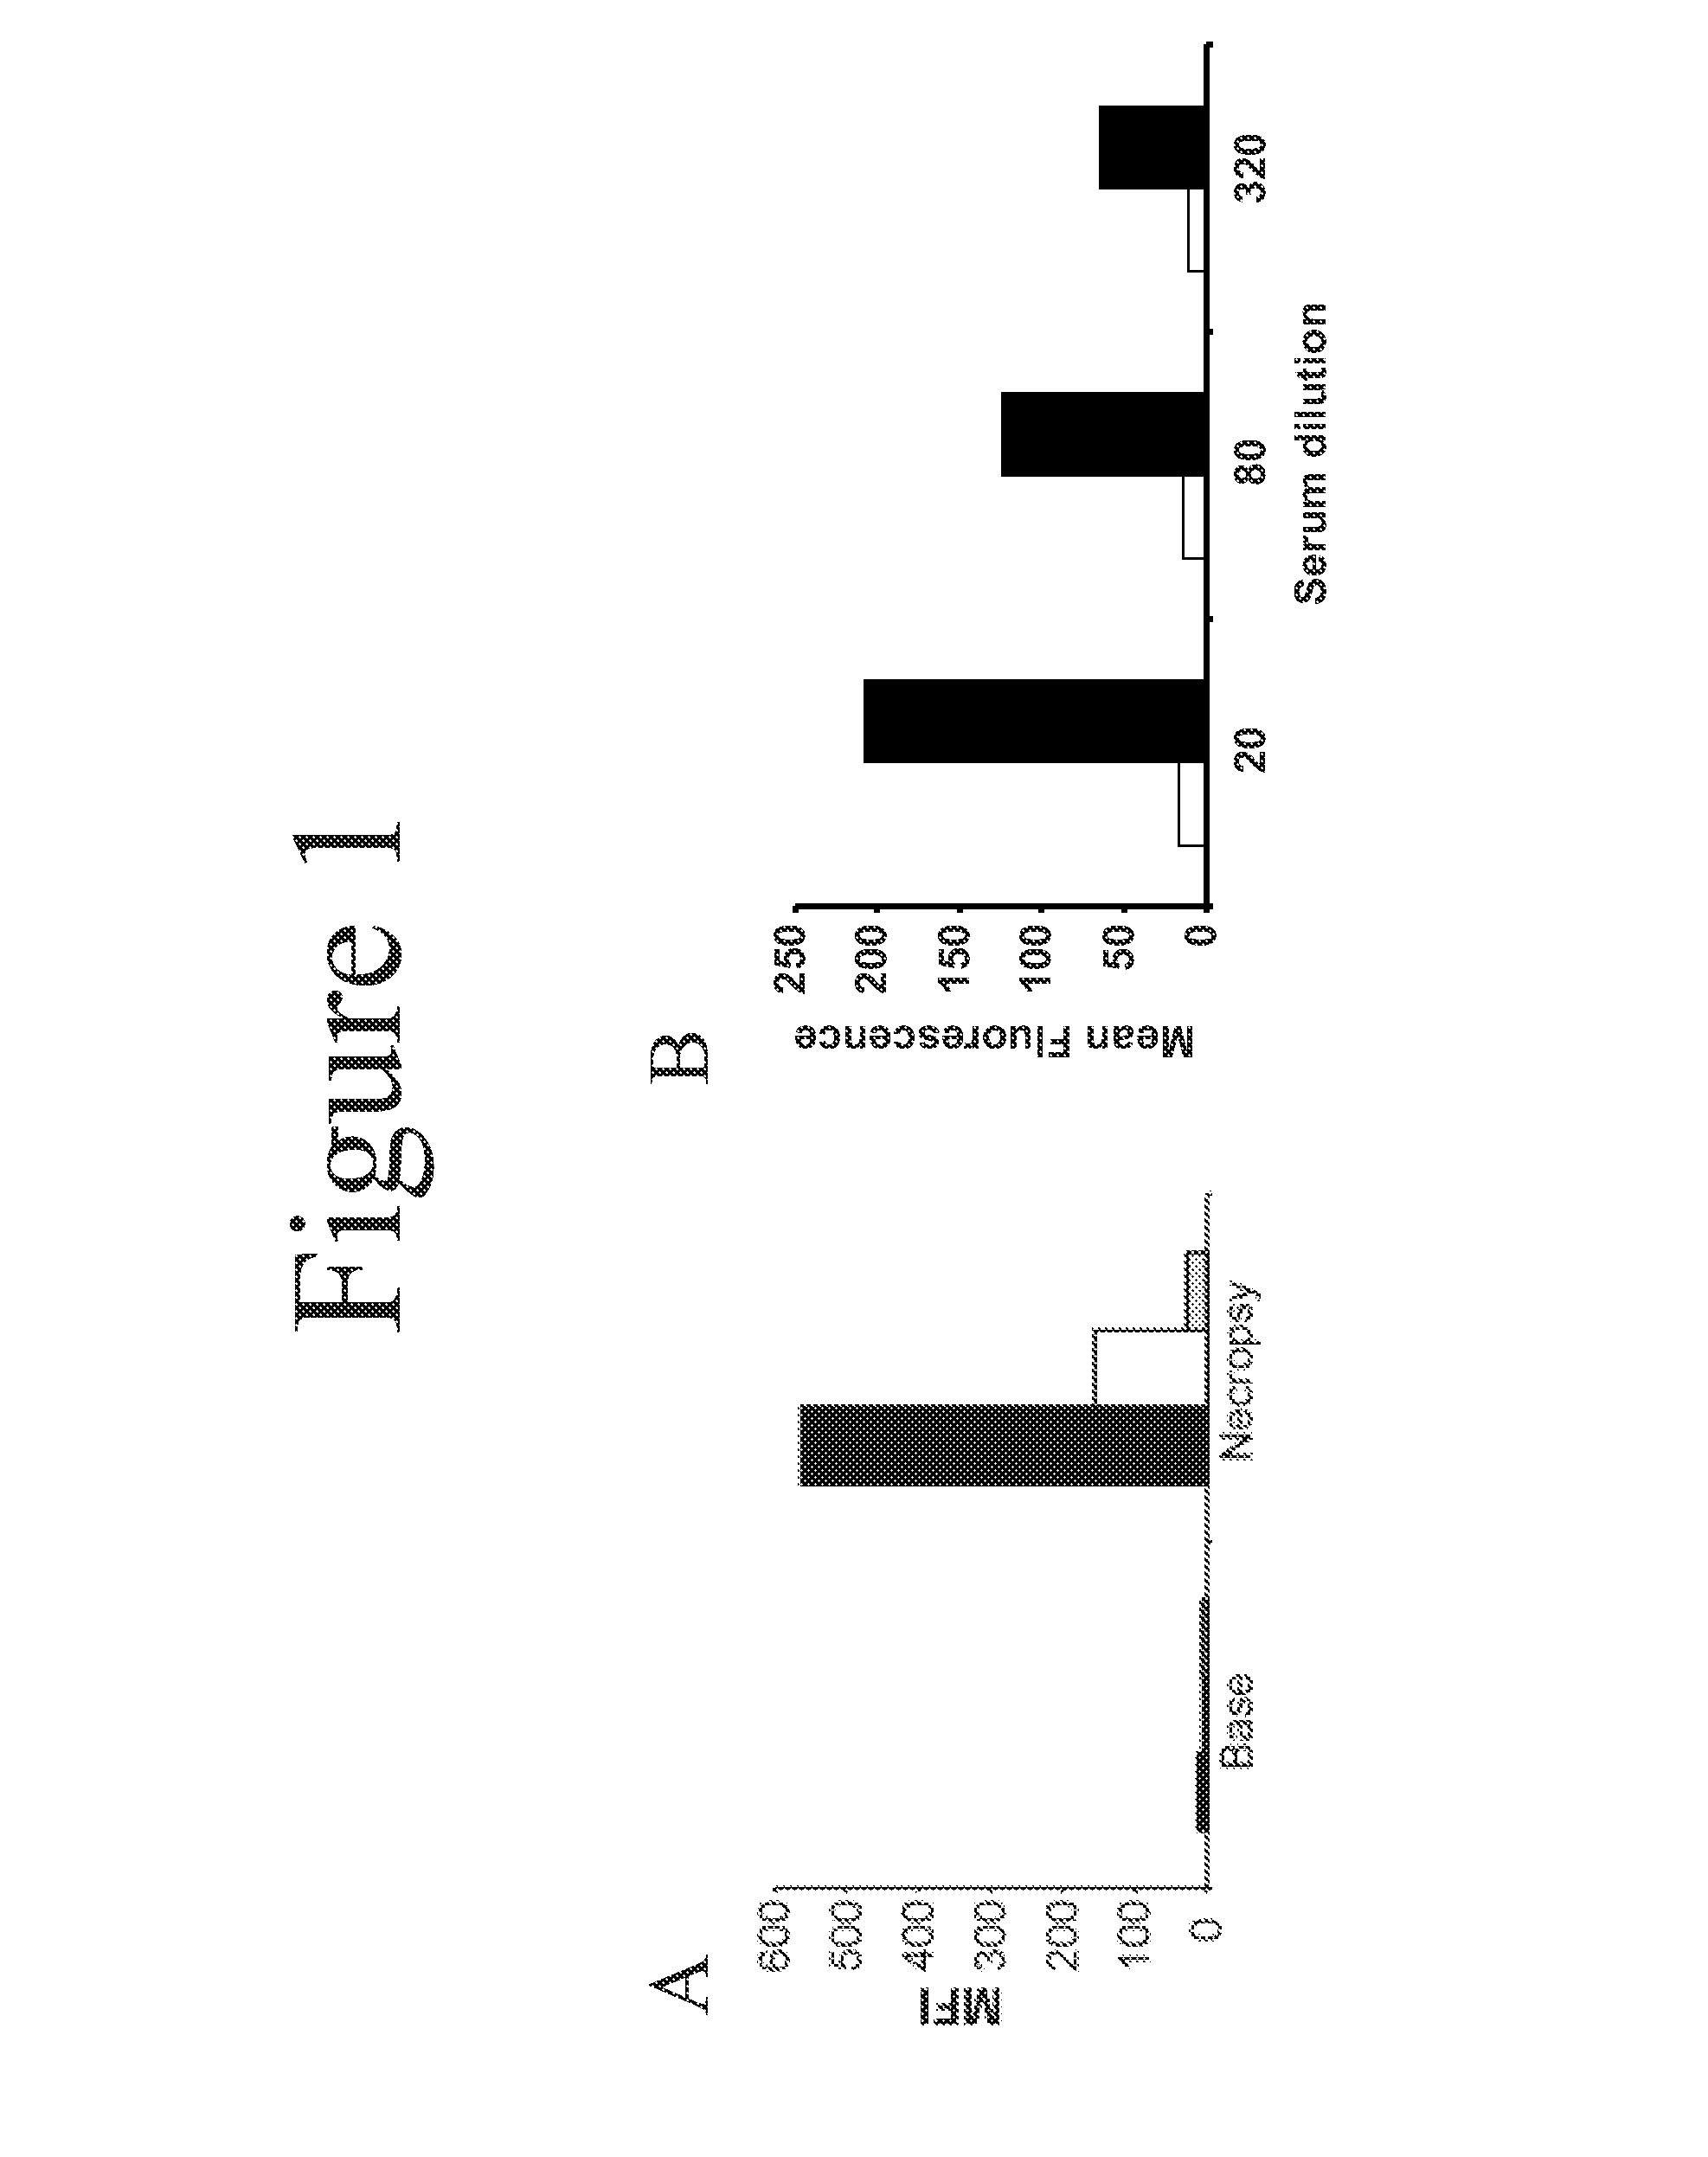 Methods and materials for reducing cardiac xenograft rejection